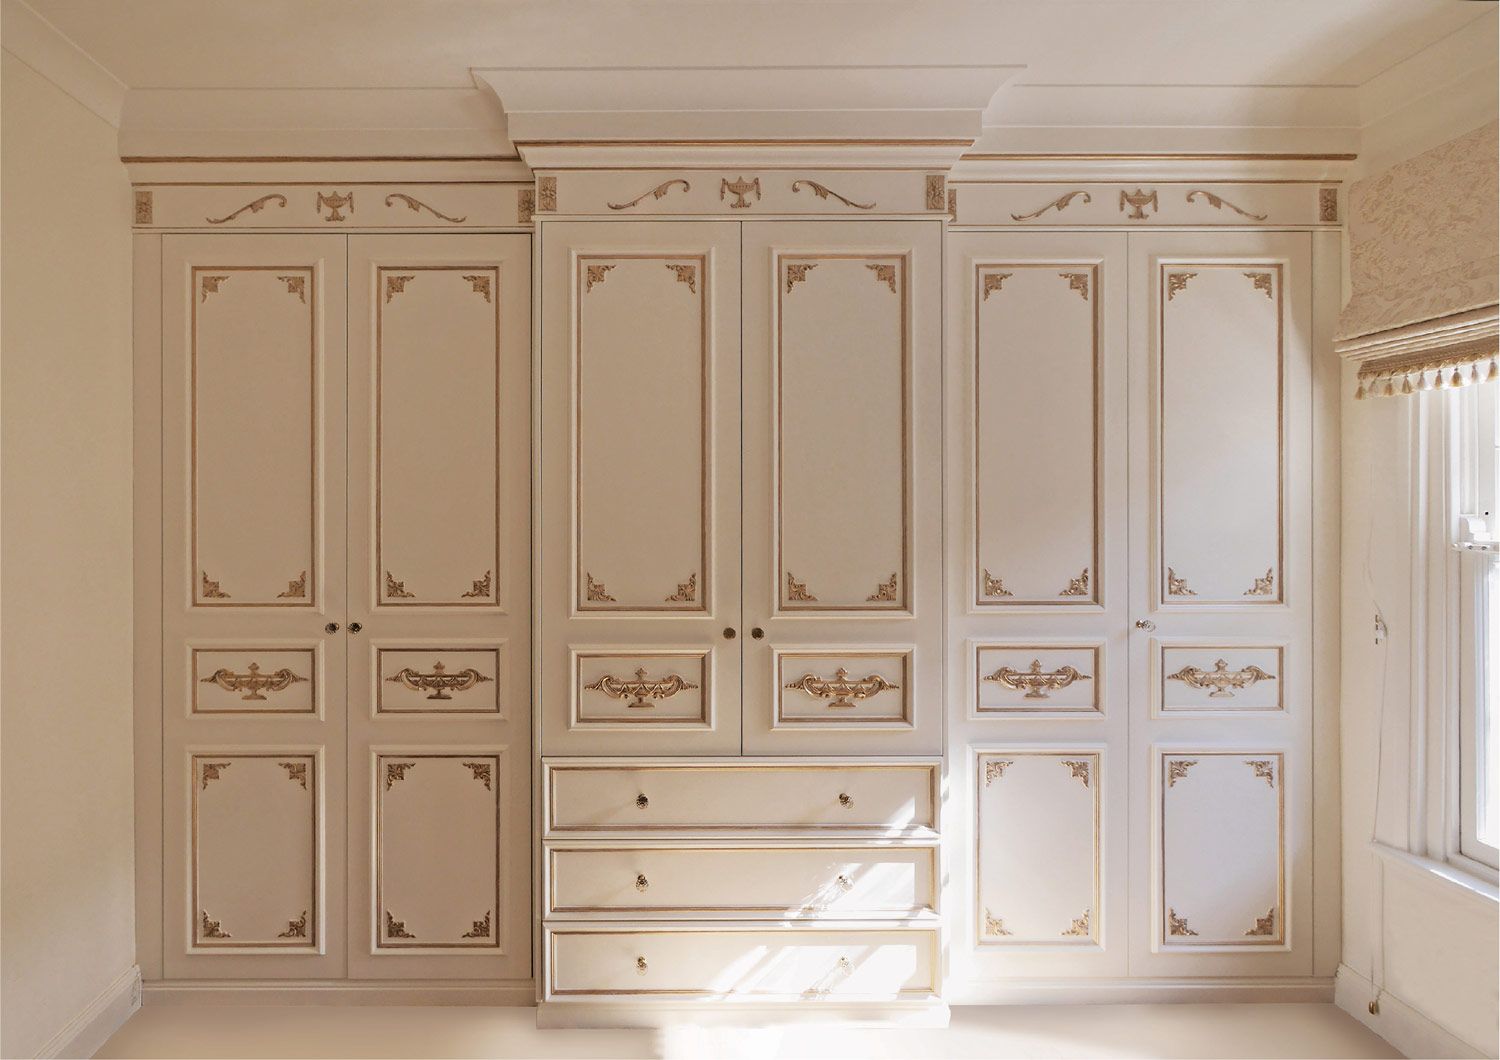 Breathtaking French Wardrobe Designs | Custom Made | Luxury Finishes Throughout French White Wardrobes (View 12 of 15)